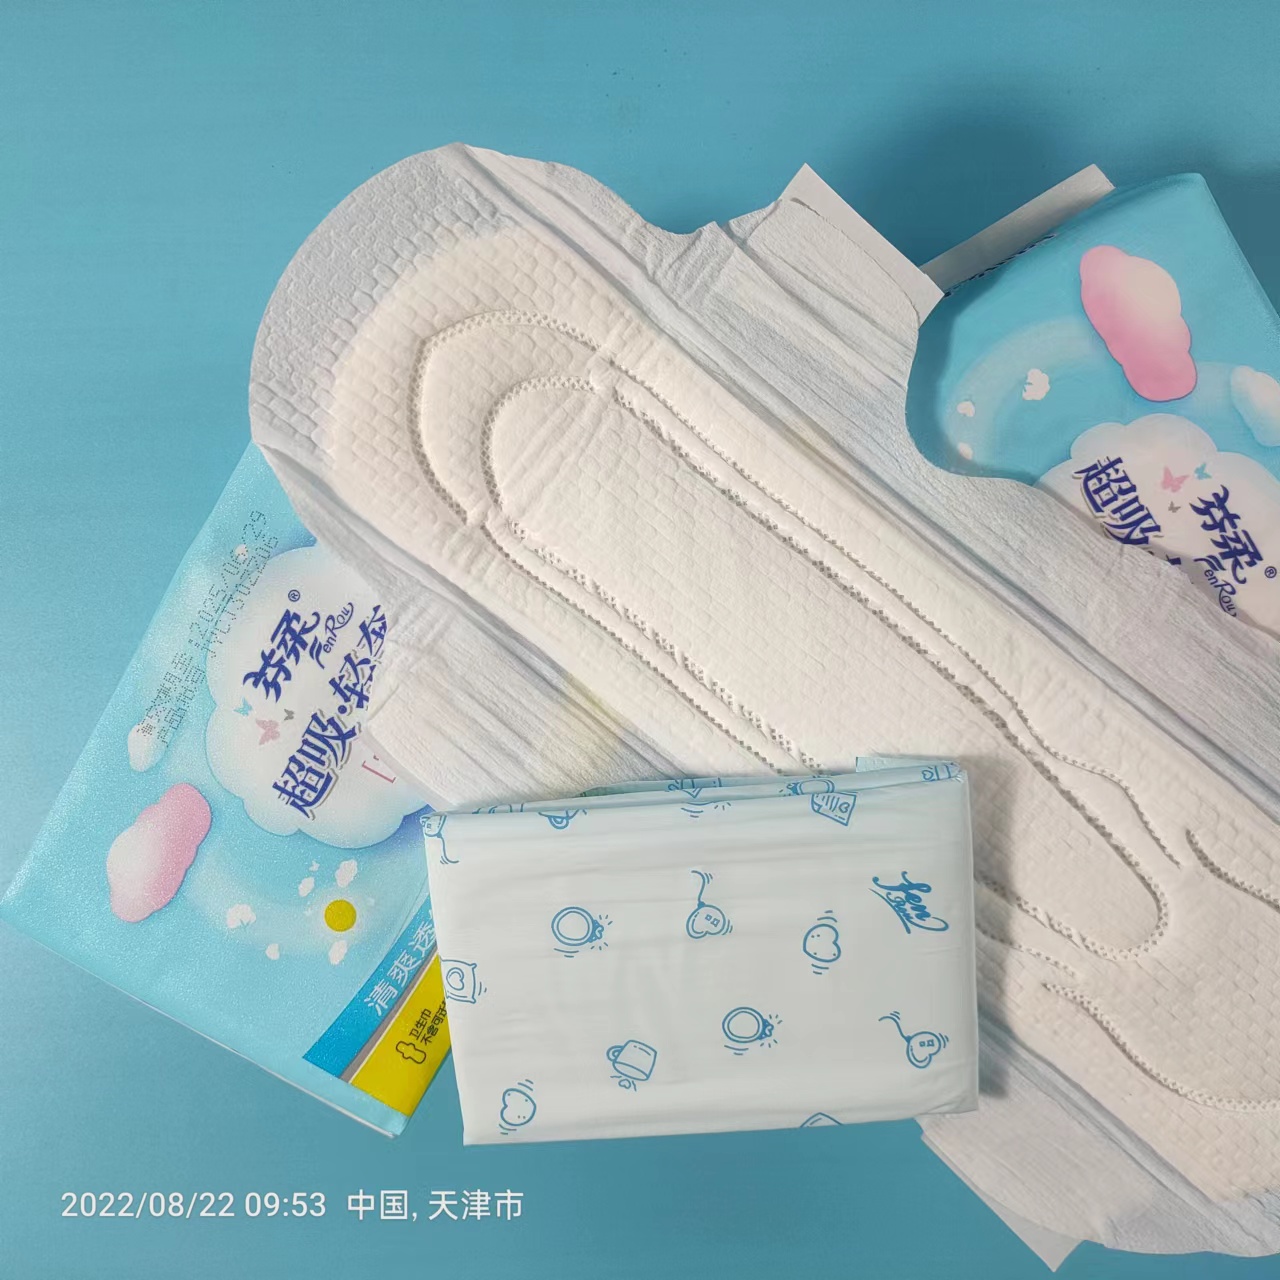 Important knowledage about sanitary napkin:how to use and storage